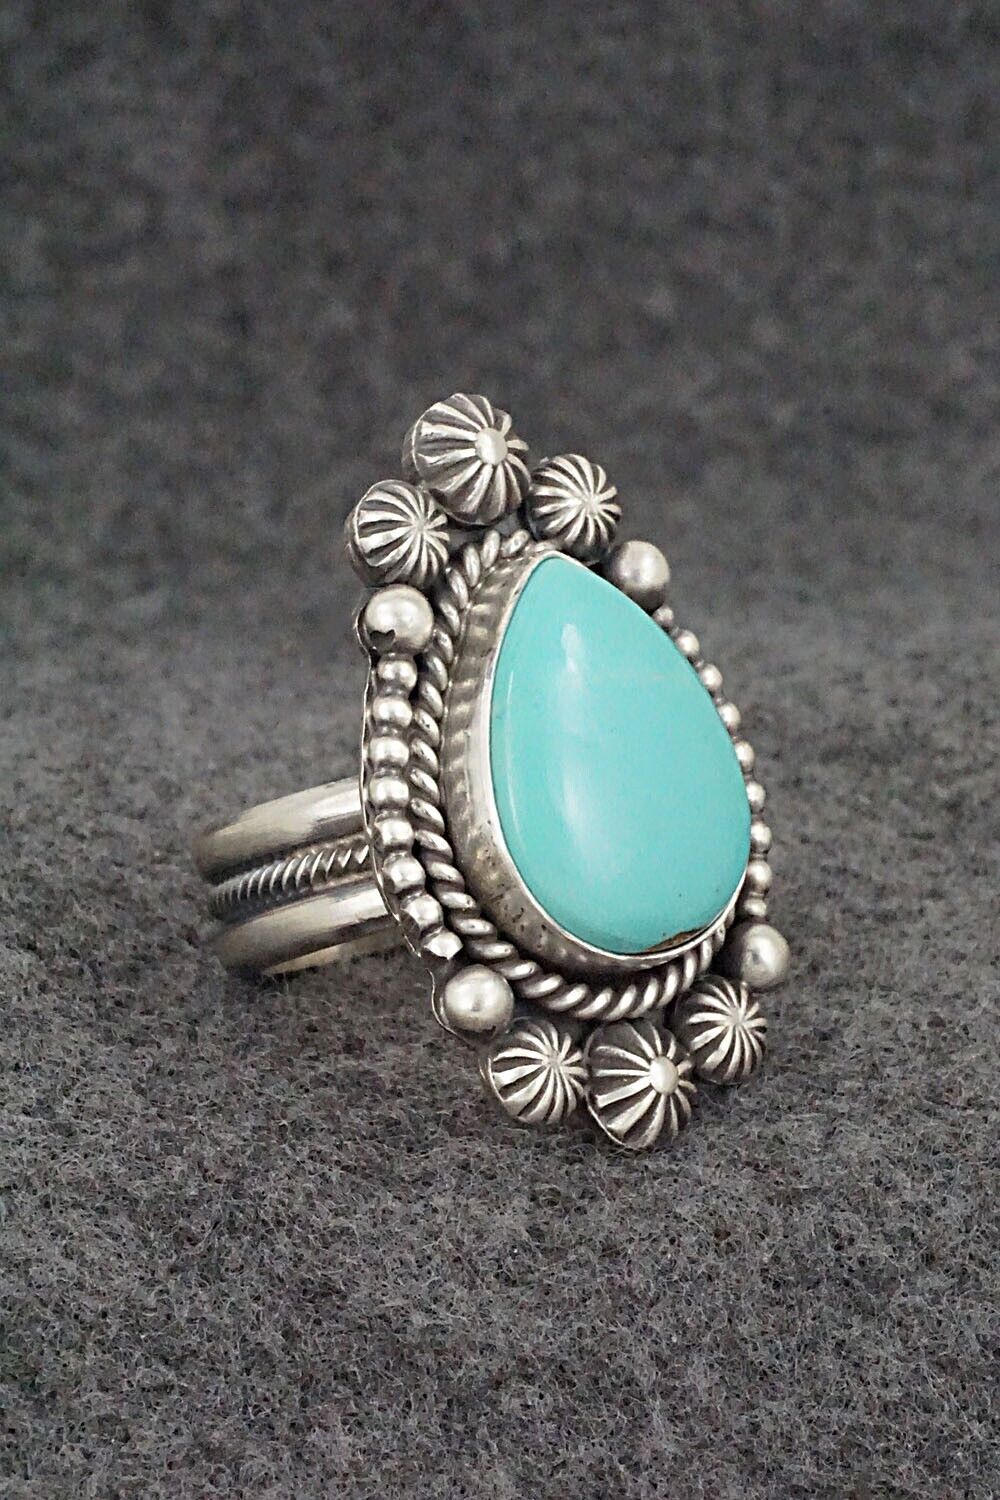 Turquoise & Sterling Silver Ring - Michael Calladitto - Size 8